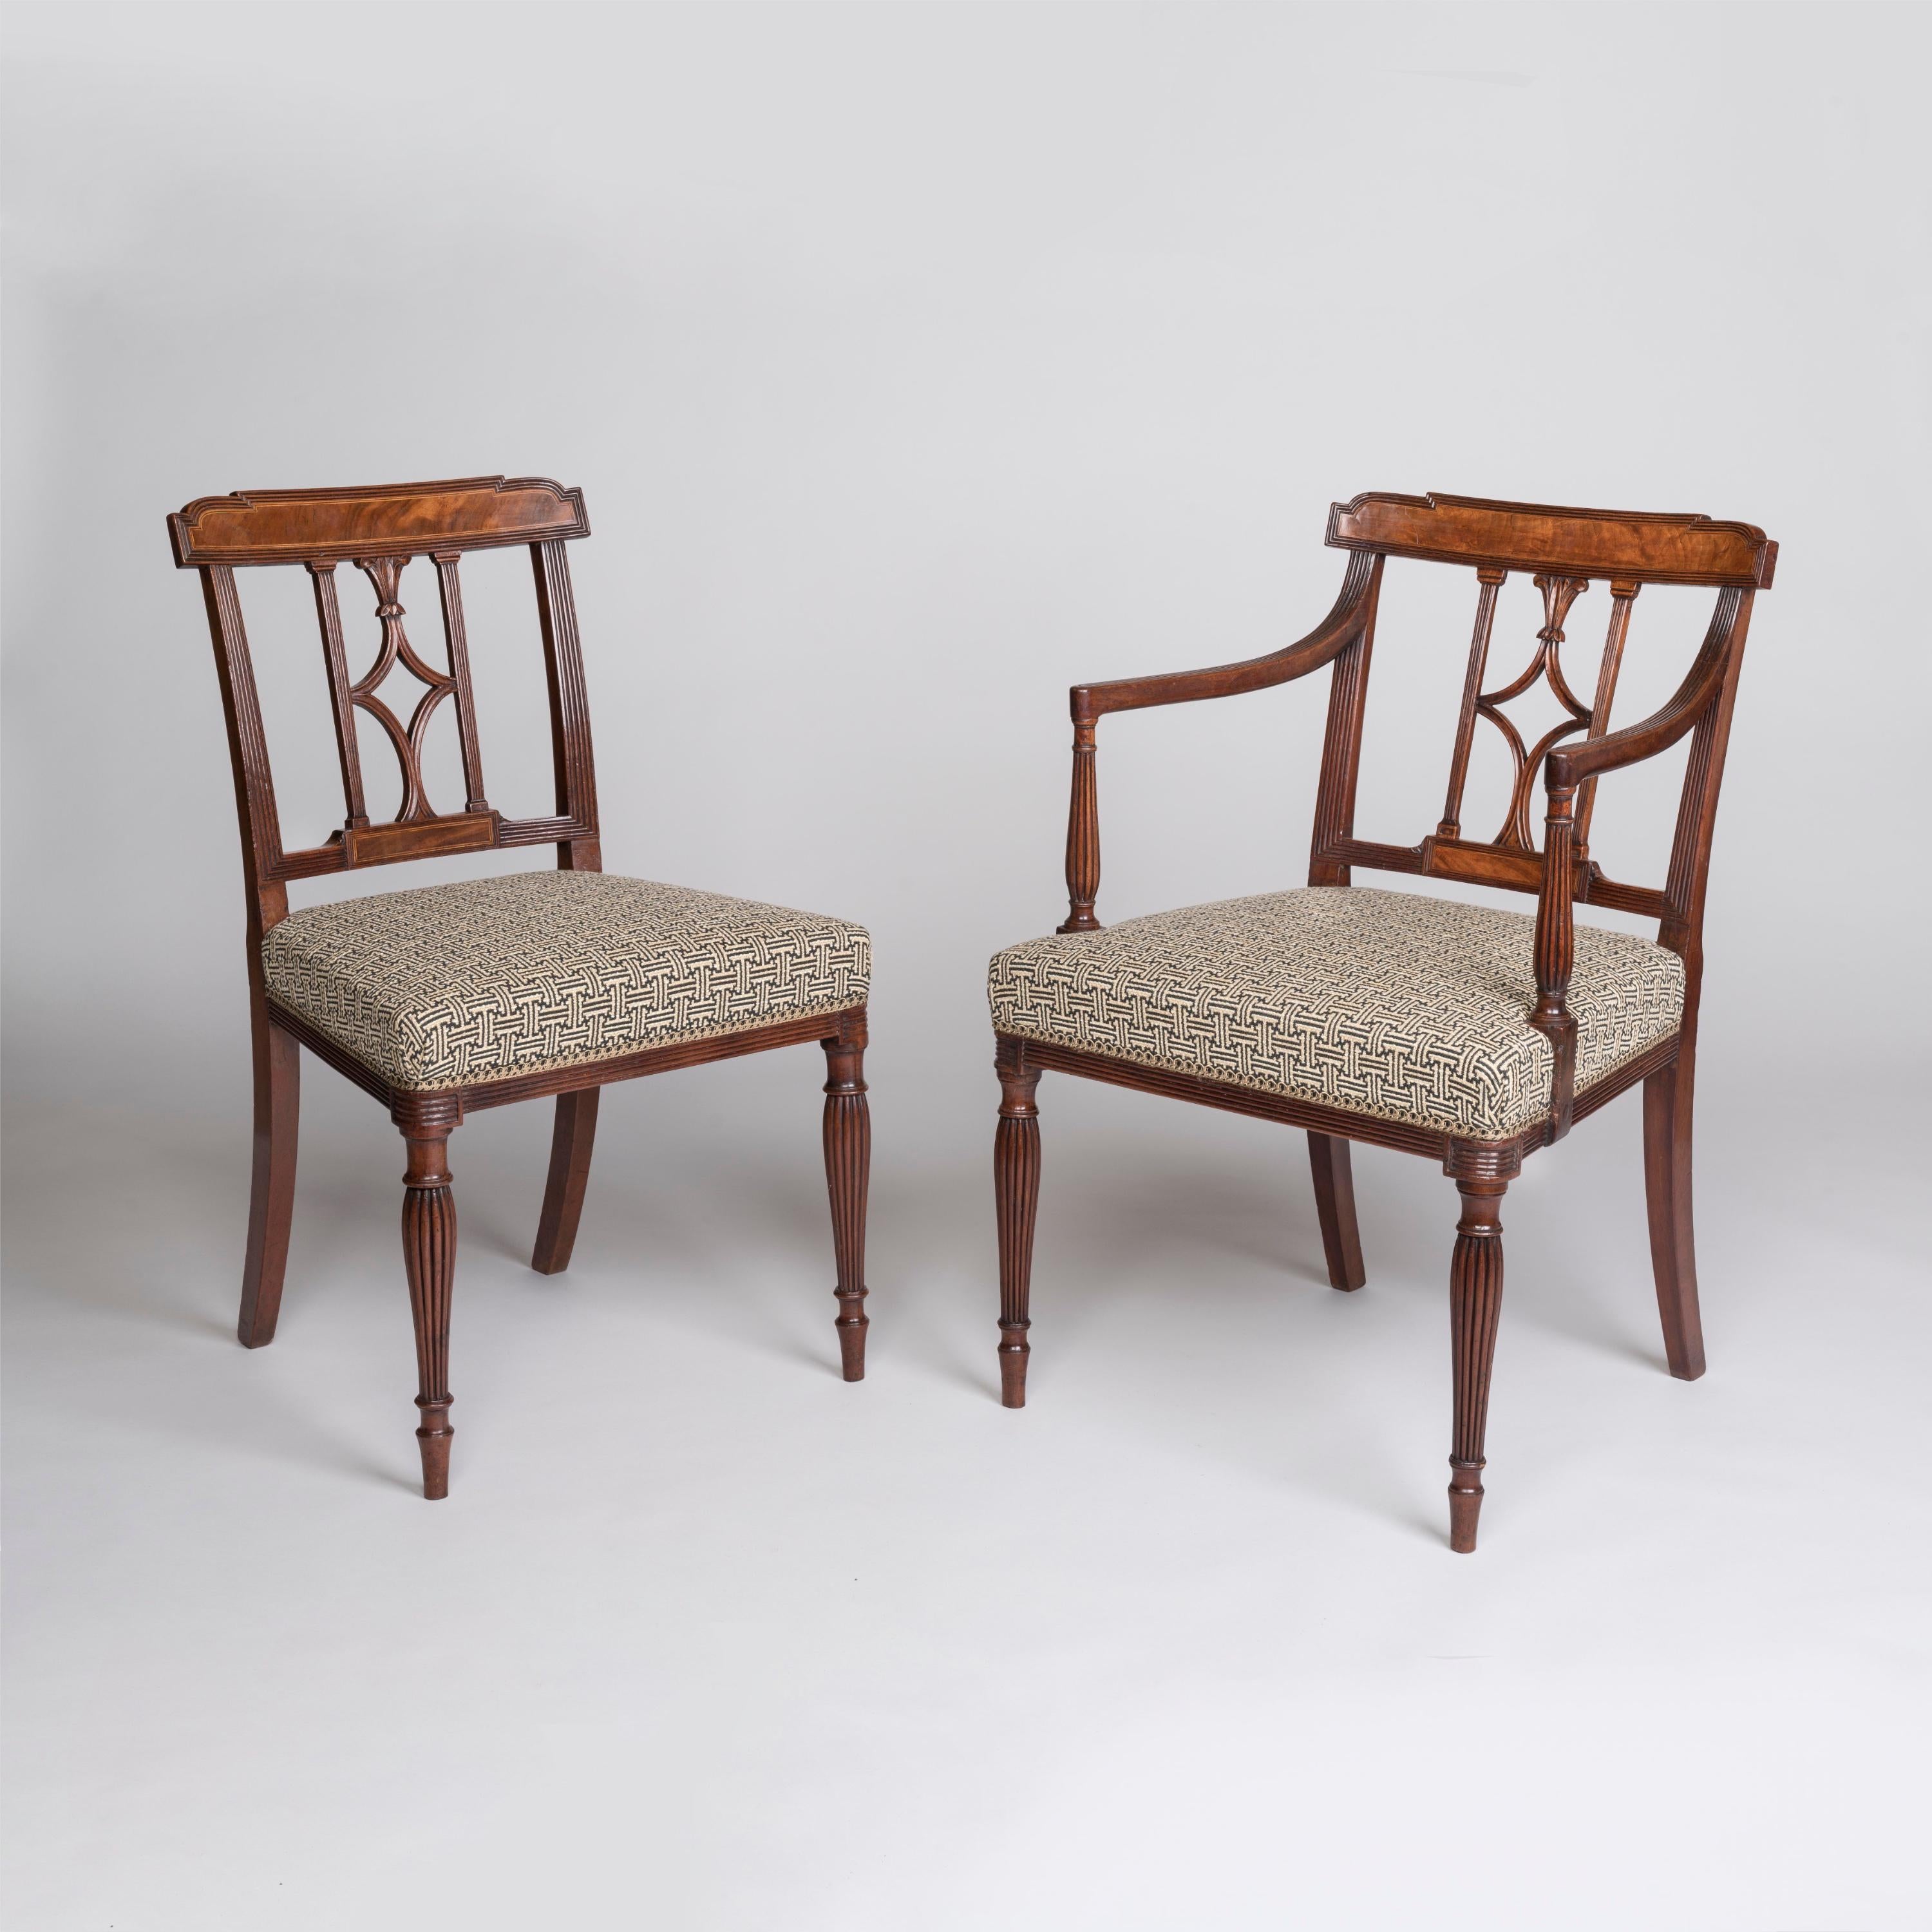 A Fine Set of Twelve George III Period Mahogany Dining Chairs
In the manner of Thomas Sheraton

Made to the highest standards and of beautifully drawn proportions, the set including a pair of armchairs with open arms on baluster reeded supports